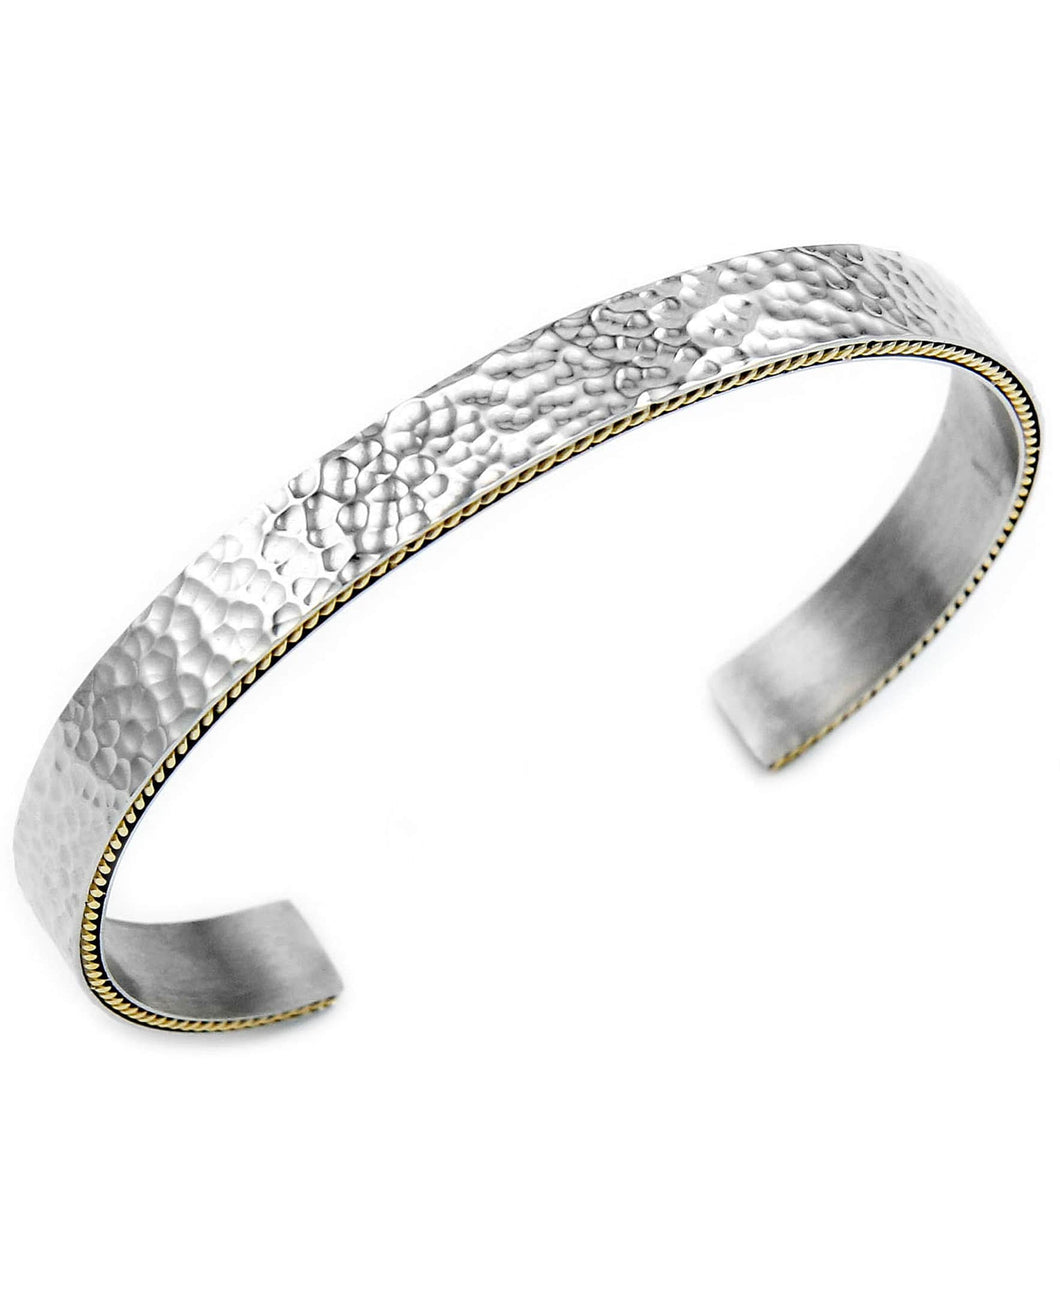 Sutton Stainless Steel Hammered Bangle Bracelet With Gold-Tone Trim